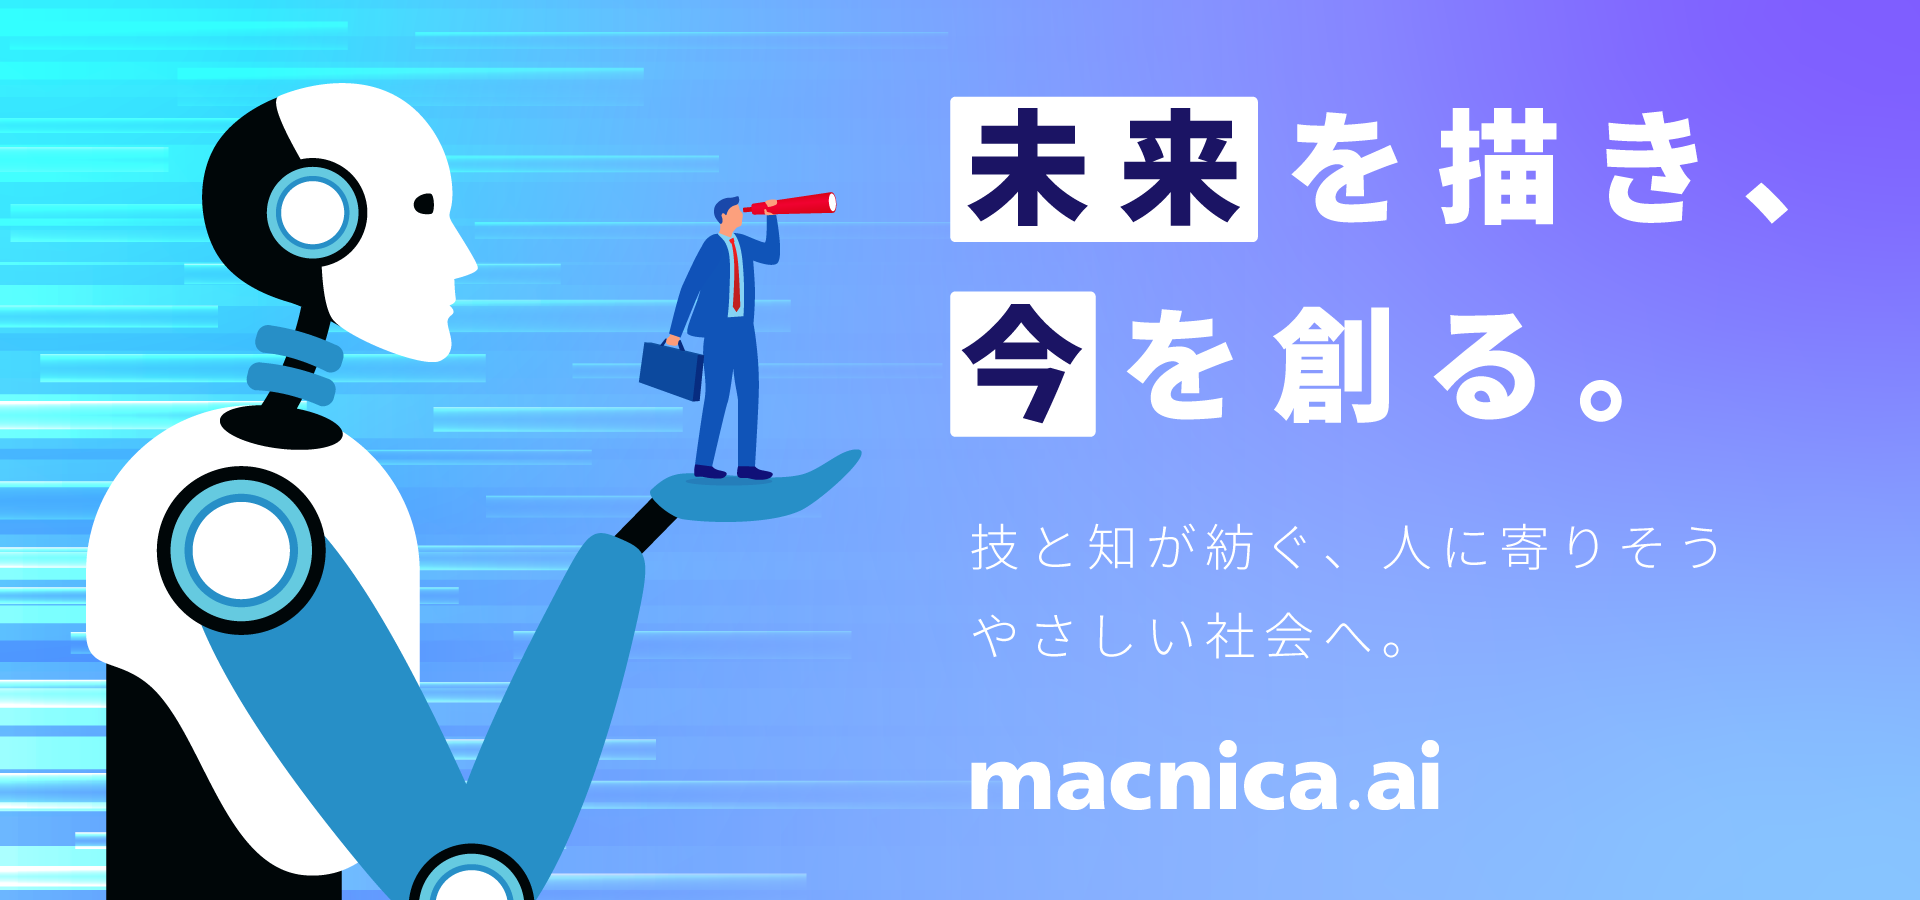 What is macnica.ai